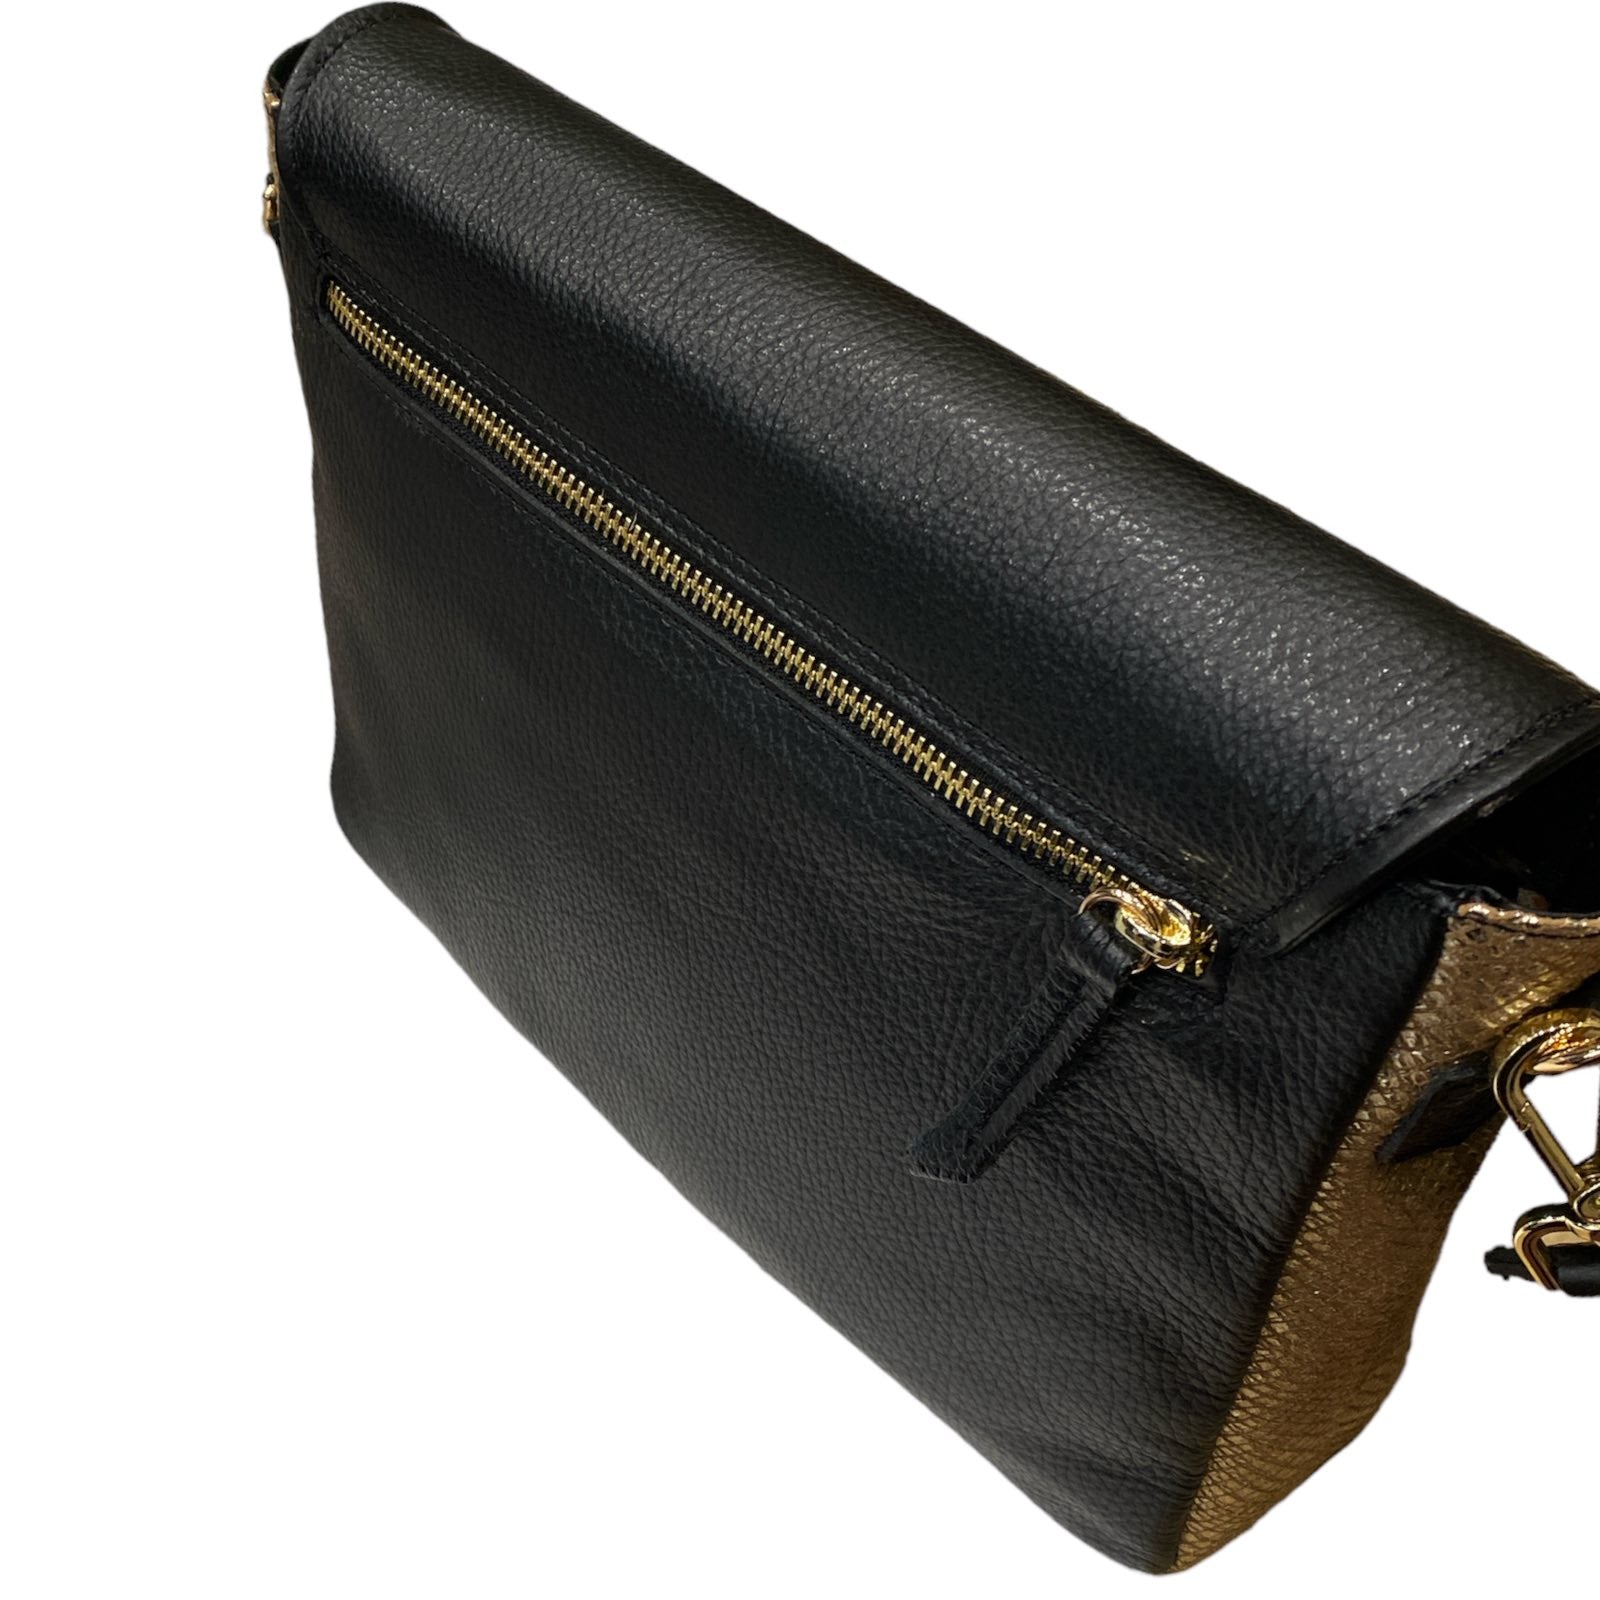 MANDY. BLACK LEATHER WITH GOLD SIDES STATEMENT BAG